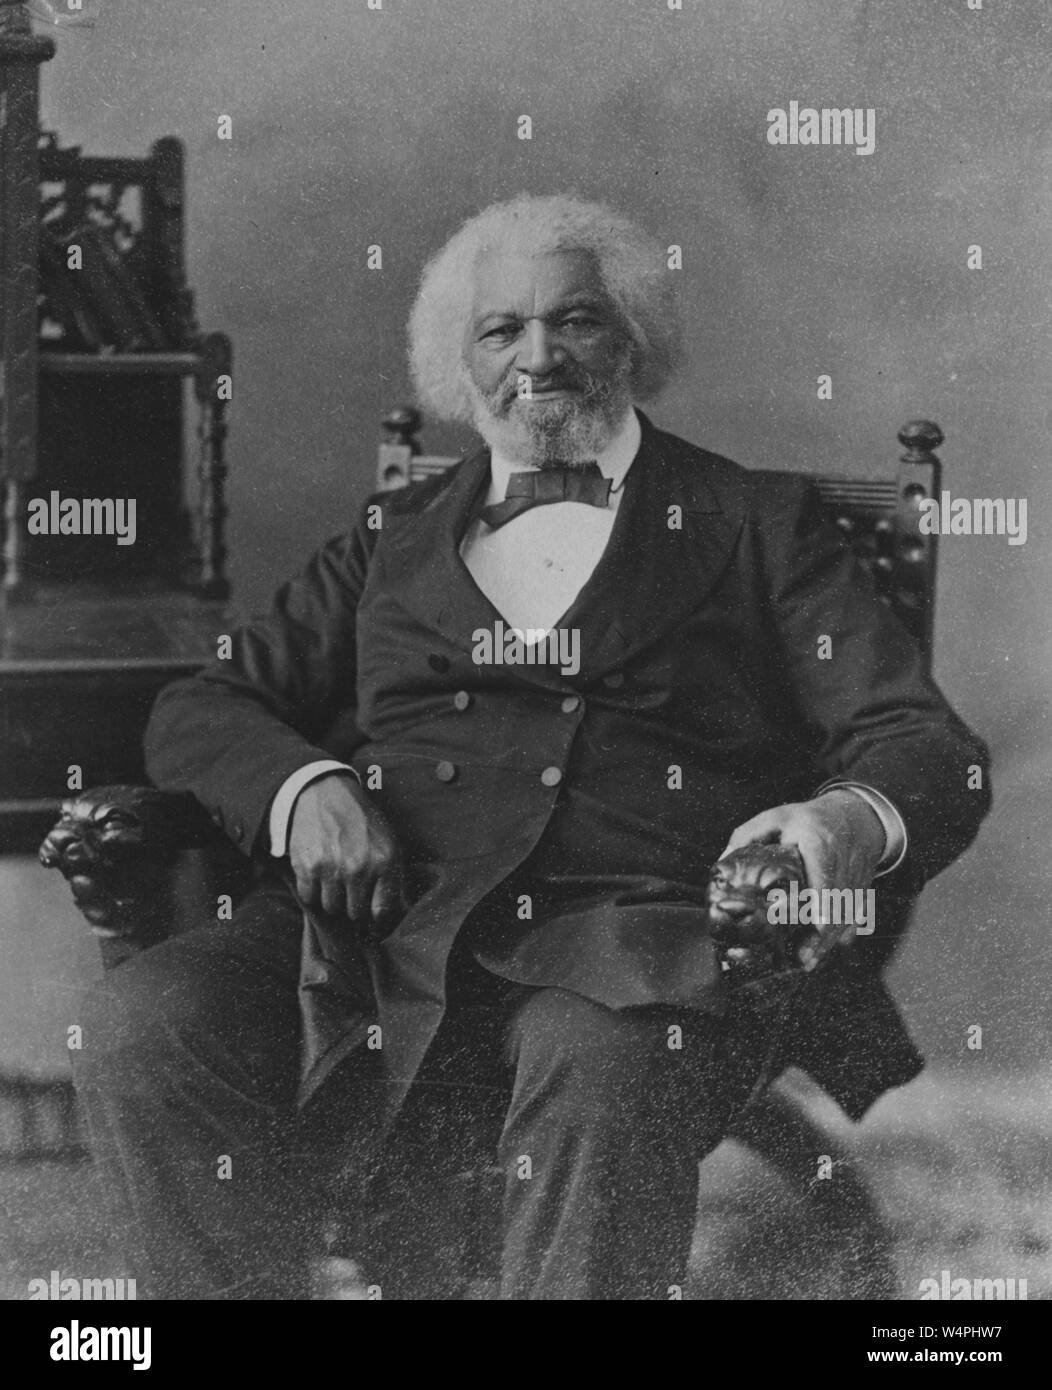 Black and white portrait photograph of African-American abolitionist, writer, orator, statesman, and social reformer, Frederick Douglass, depicted seated, in three-quarter length view, wearing a dark, double-breasted suit with a bow tie, facing the camera, with white hair and beard, and a serious expression on his face, 1880. From the New York Public Library. () Stock Photo